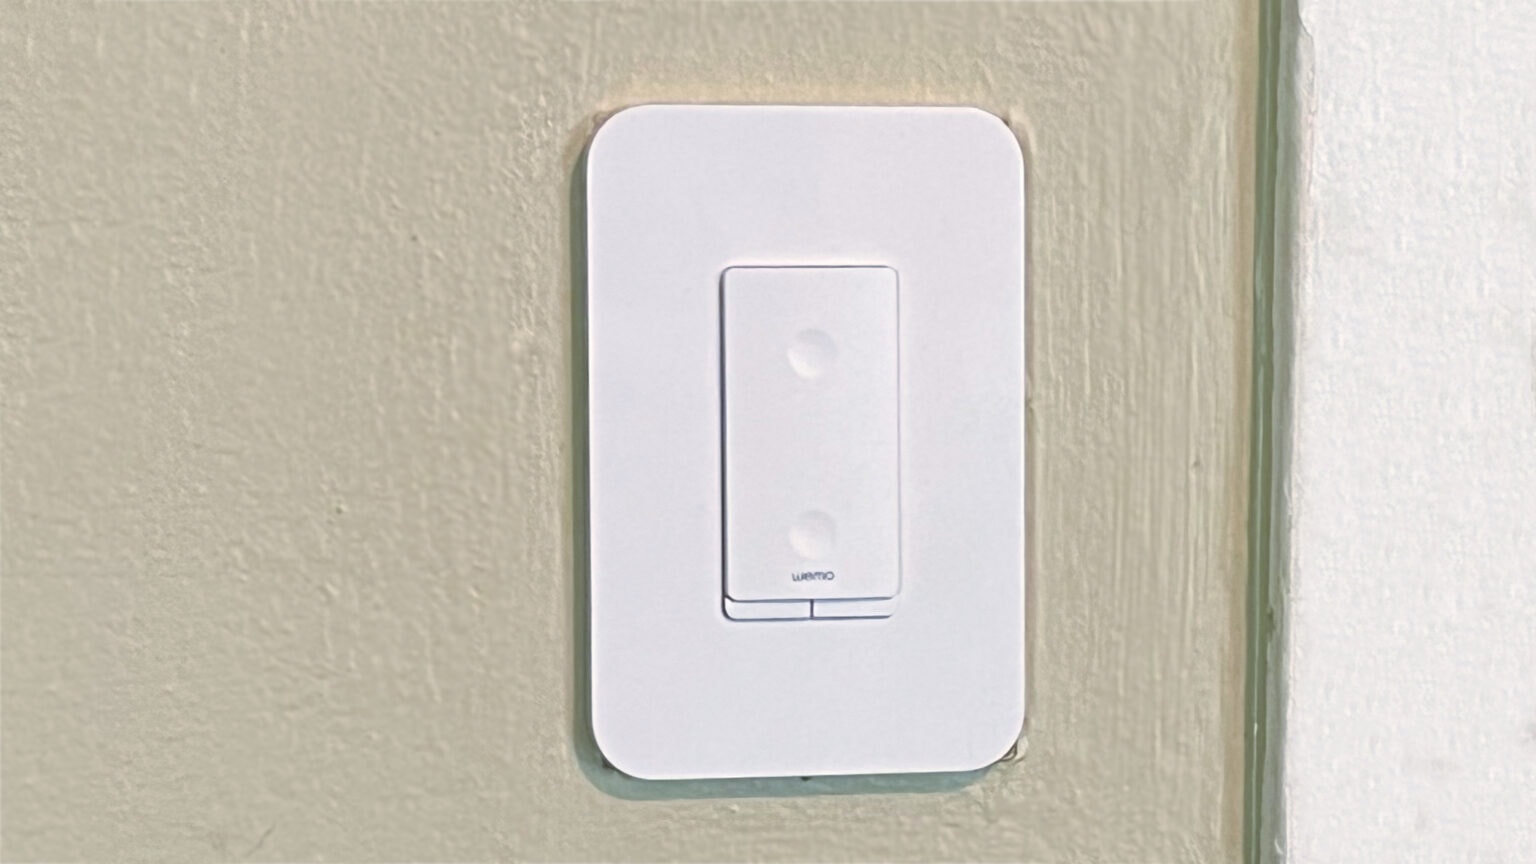 Wemo Smart Dimmer with Thread review